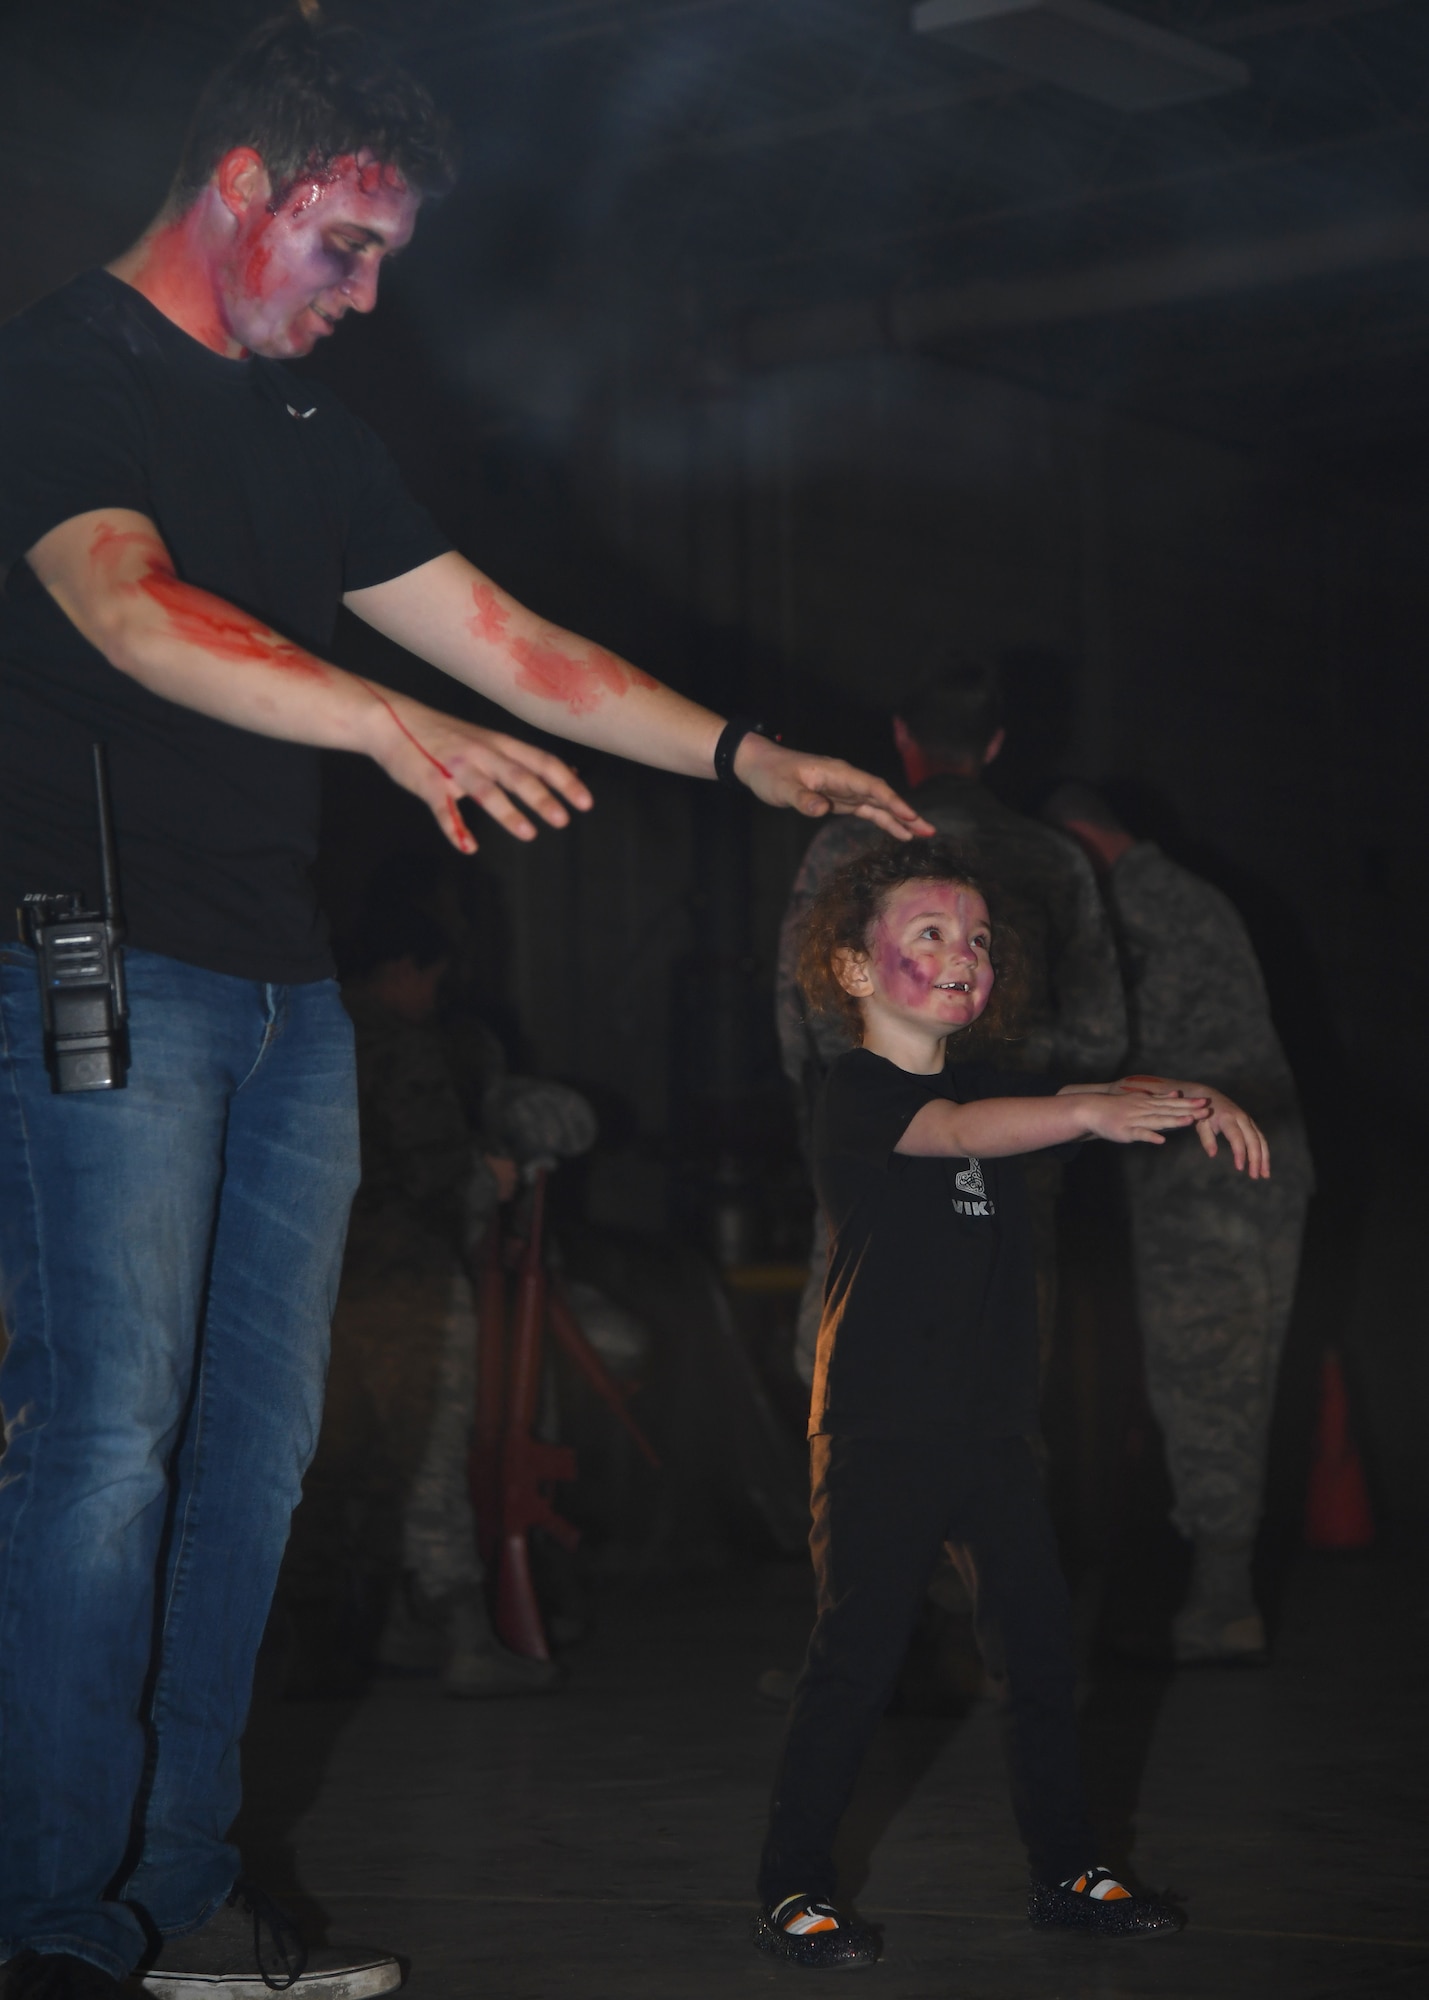 Kariana Henry, three years, shows off her zombie walk to an Operation Iron Zombie volunteer October 31, 2018, on Grand Forks Air Force Base. Iron Zombie was a Halloween-themed readiness exercise, with actors dressing up in spooky costumes to scare Airmen participating in the event. (U.S. Air Force photo by Airman 1st Class Elora J. Martinez)